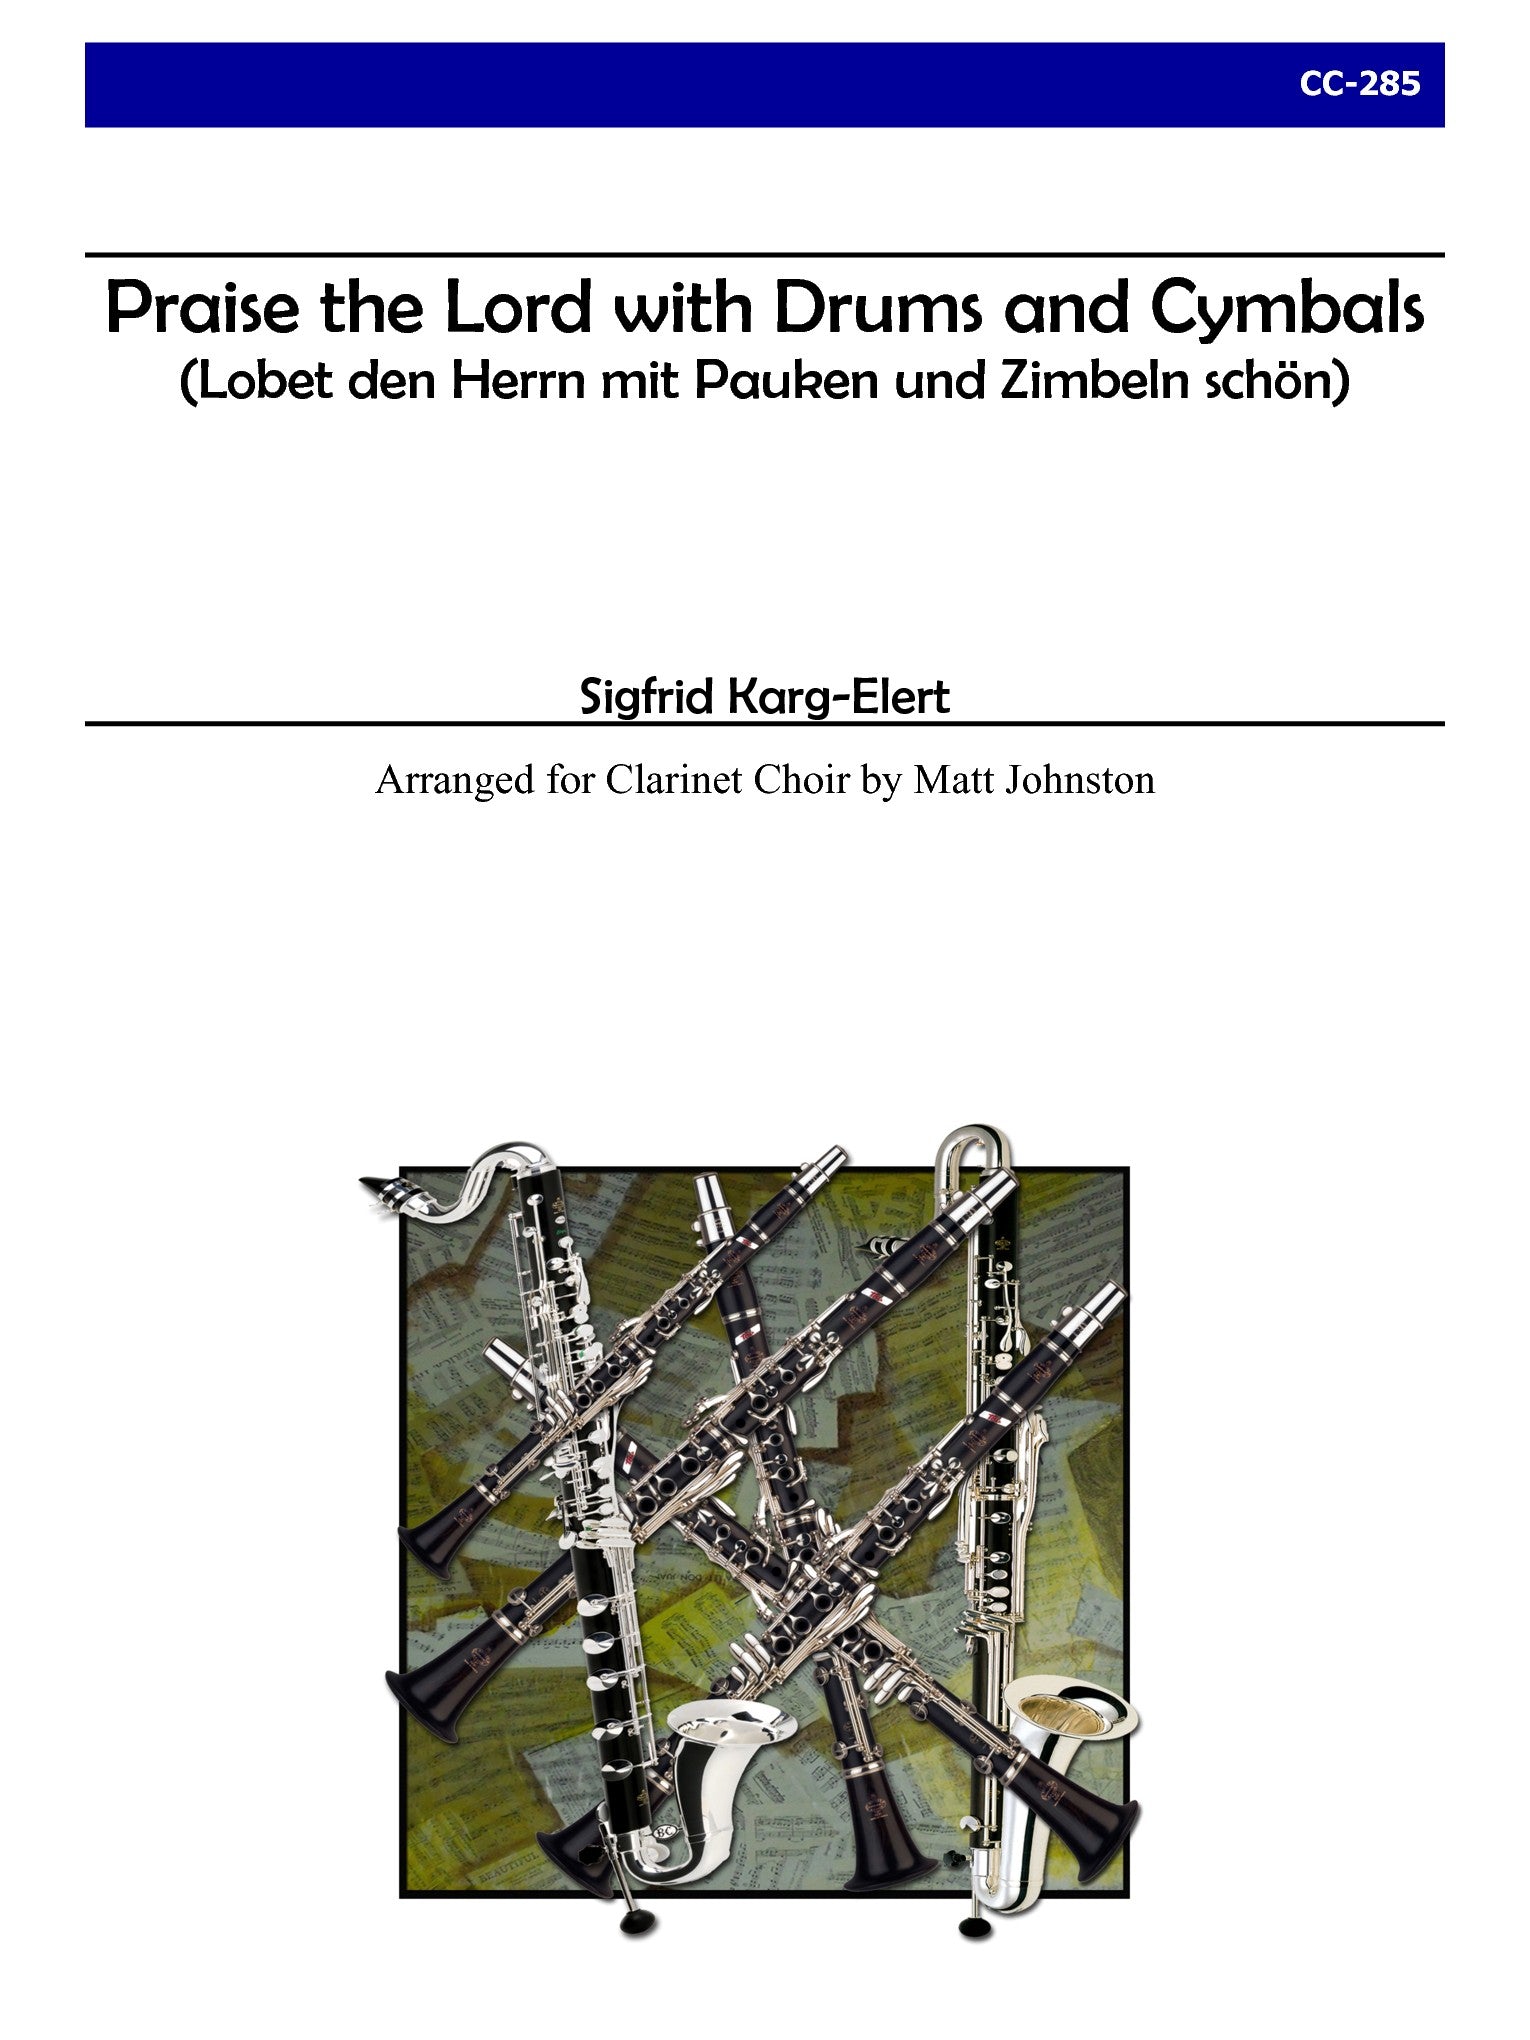 Karg-Elert (arr. Matt Johnston) - Praise the Lord with Drums and Cymbals for Clarinet Choir